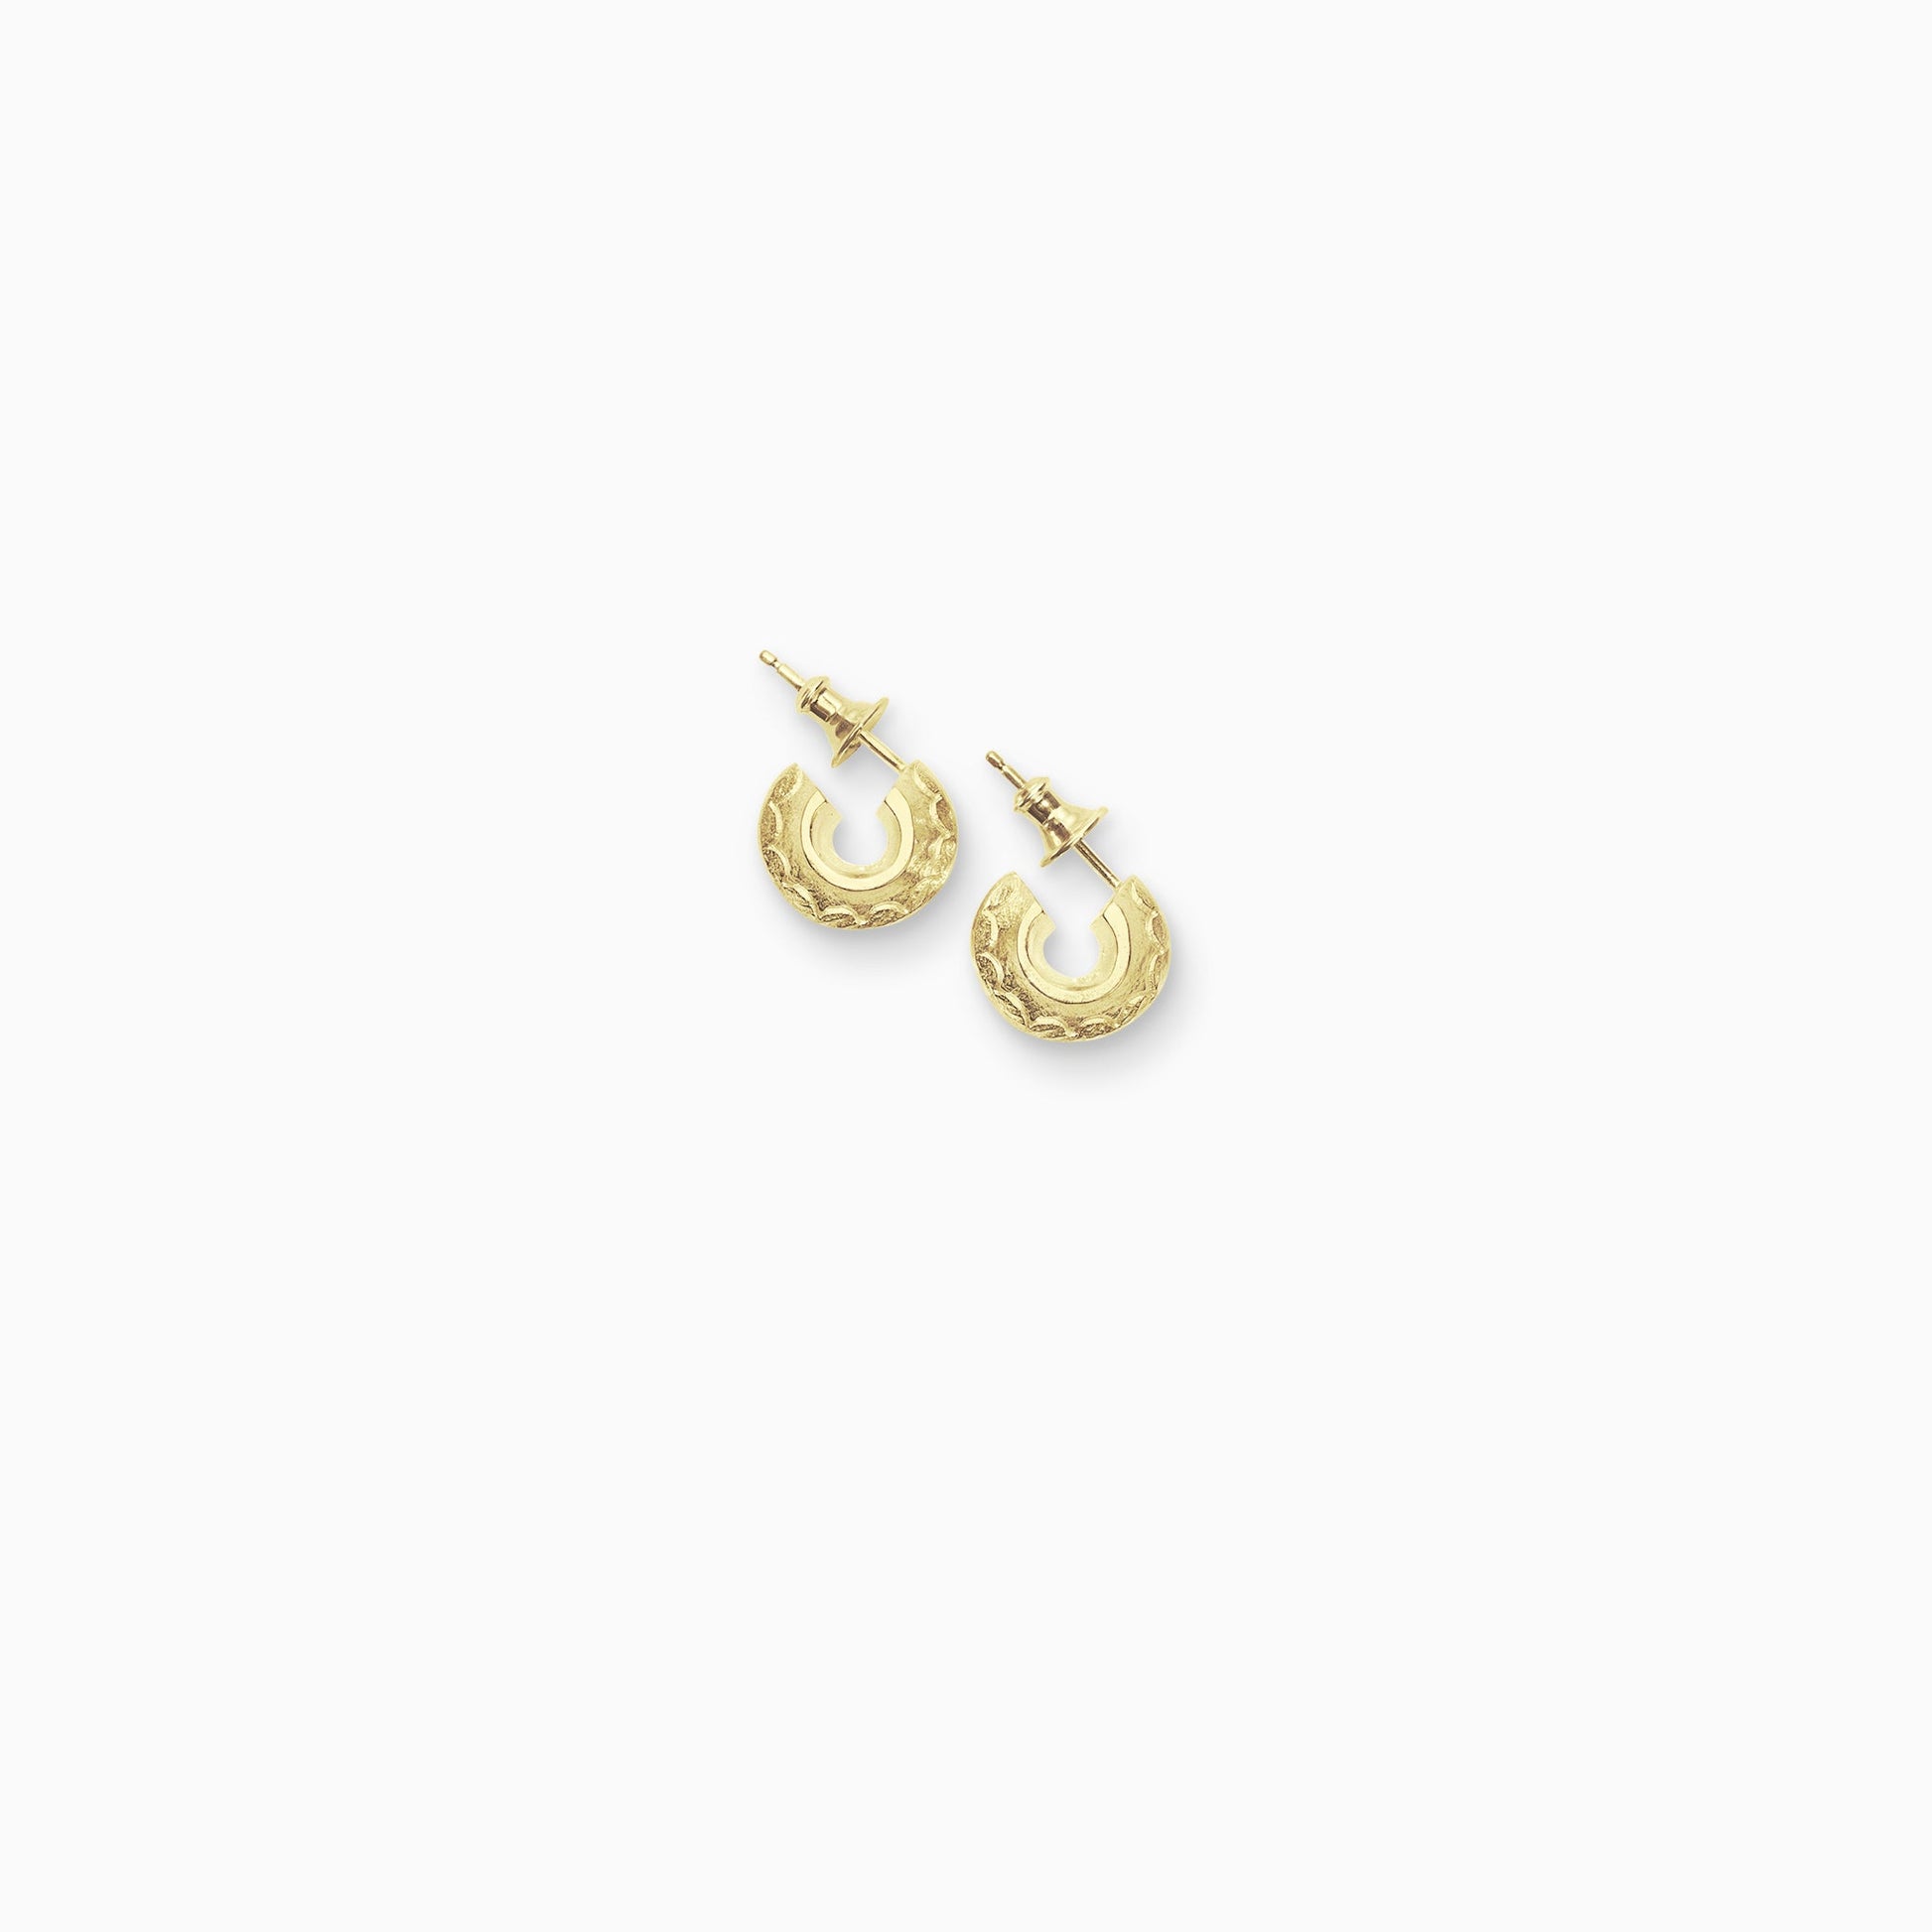 A pair of 18ct Fairtrade yellow gold round hoop earrings with a stud fastening. Sitting snug to the ear with a scalloped pattern engraved around the outer edge. 14mm outside diameter.